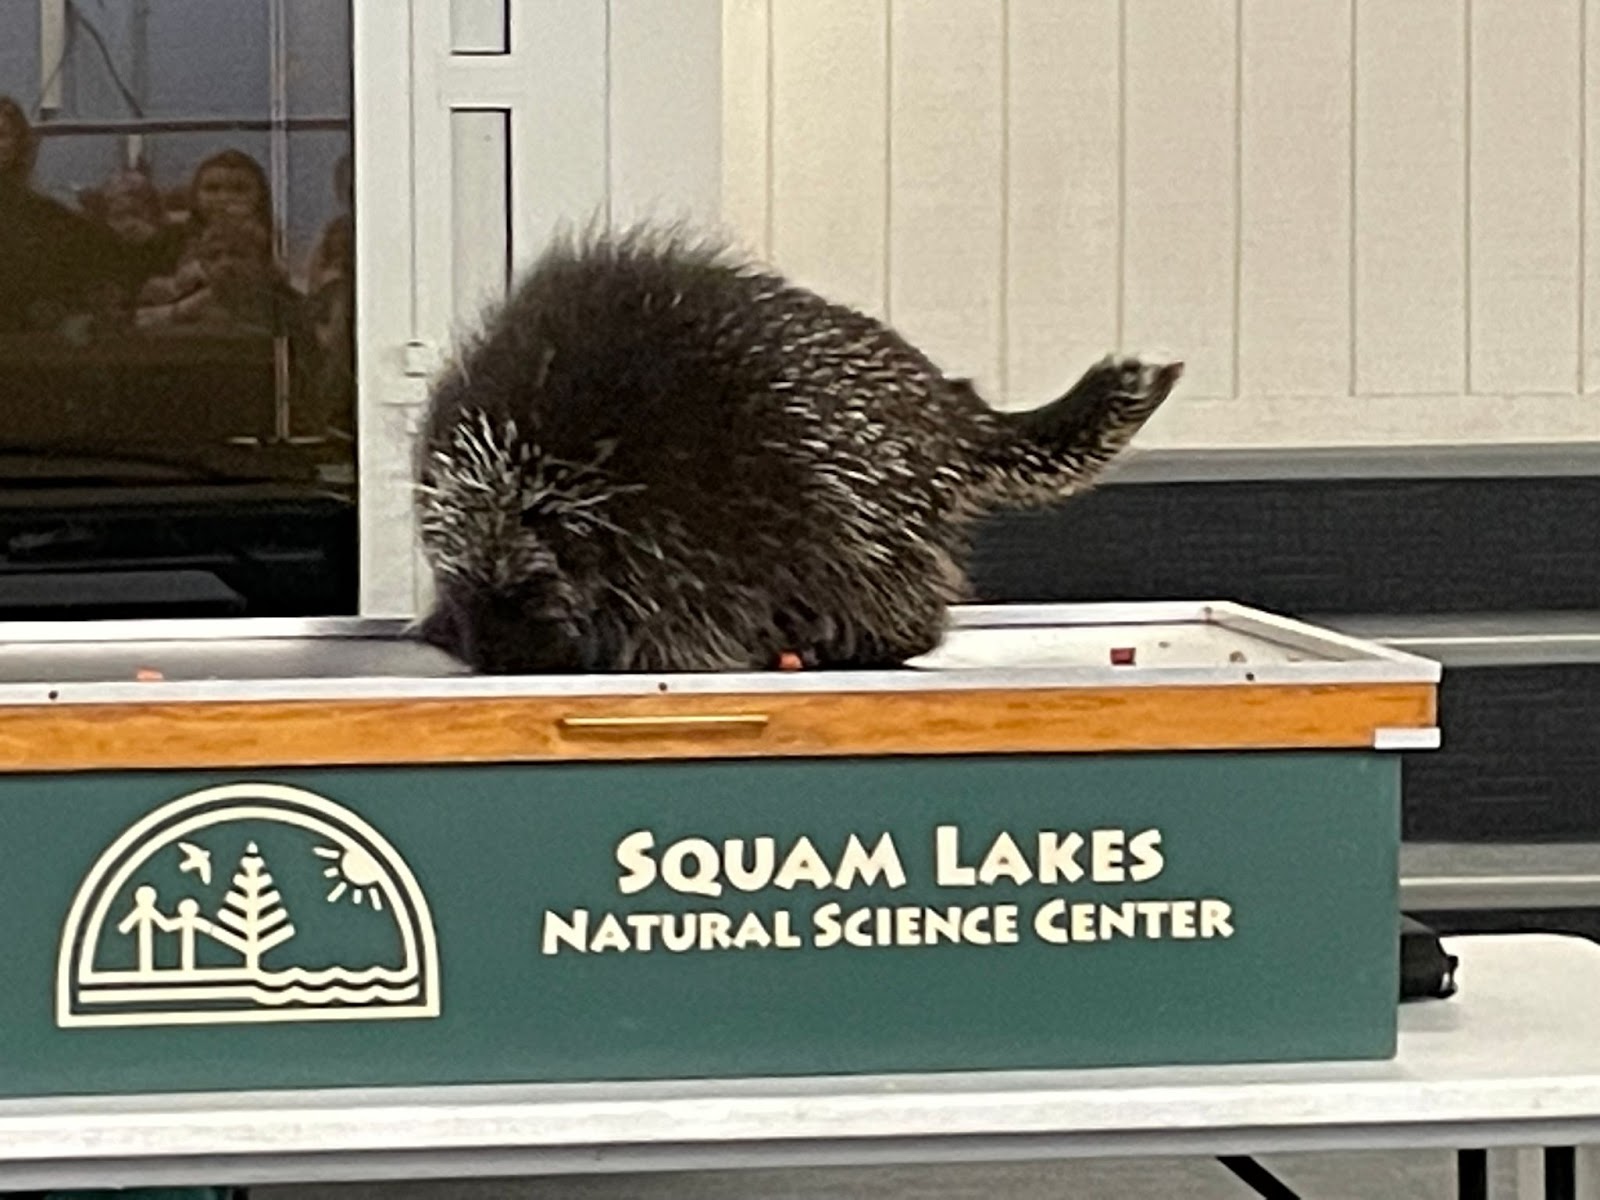 North Porcupine standing on box labeled Squam Lakes Natural Science Center, and eating a snack.